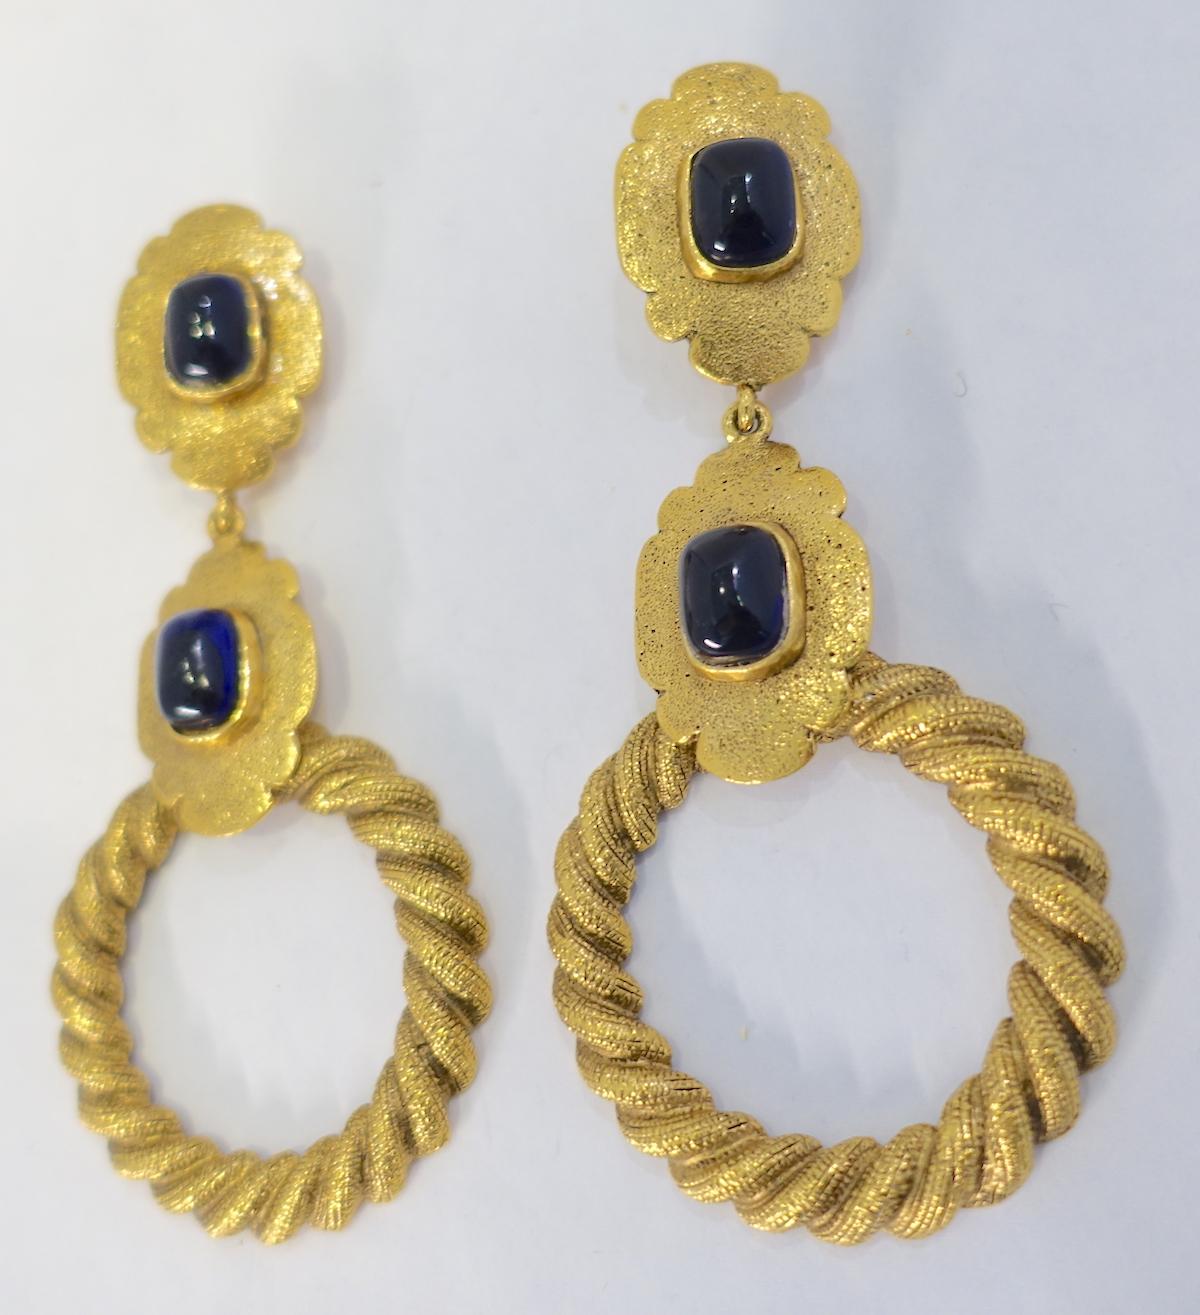 These vintage Chanel ribbed hoop earrings are connected to two gold tone links on top with blue Gripoix glass centers. In excellent condition, these clip earrings measure 4-1/4” x 2” and are signed “Chanel 25 Made in France”.